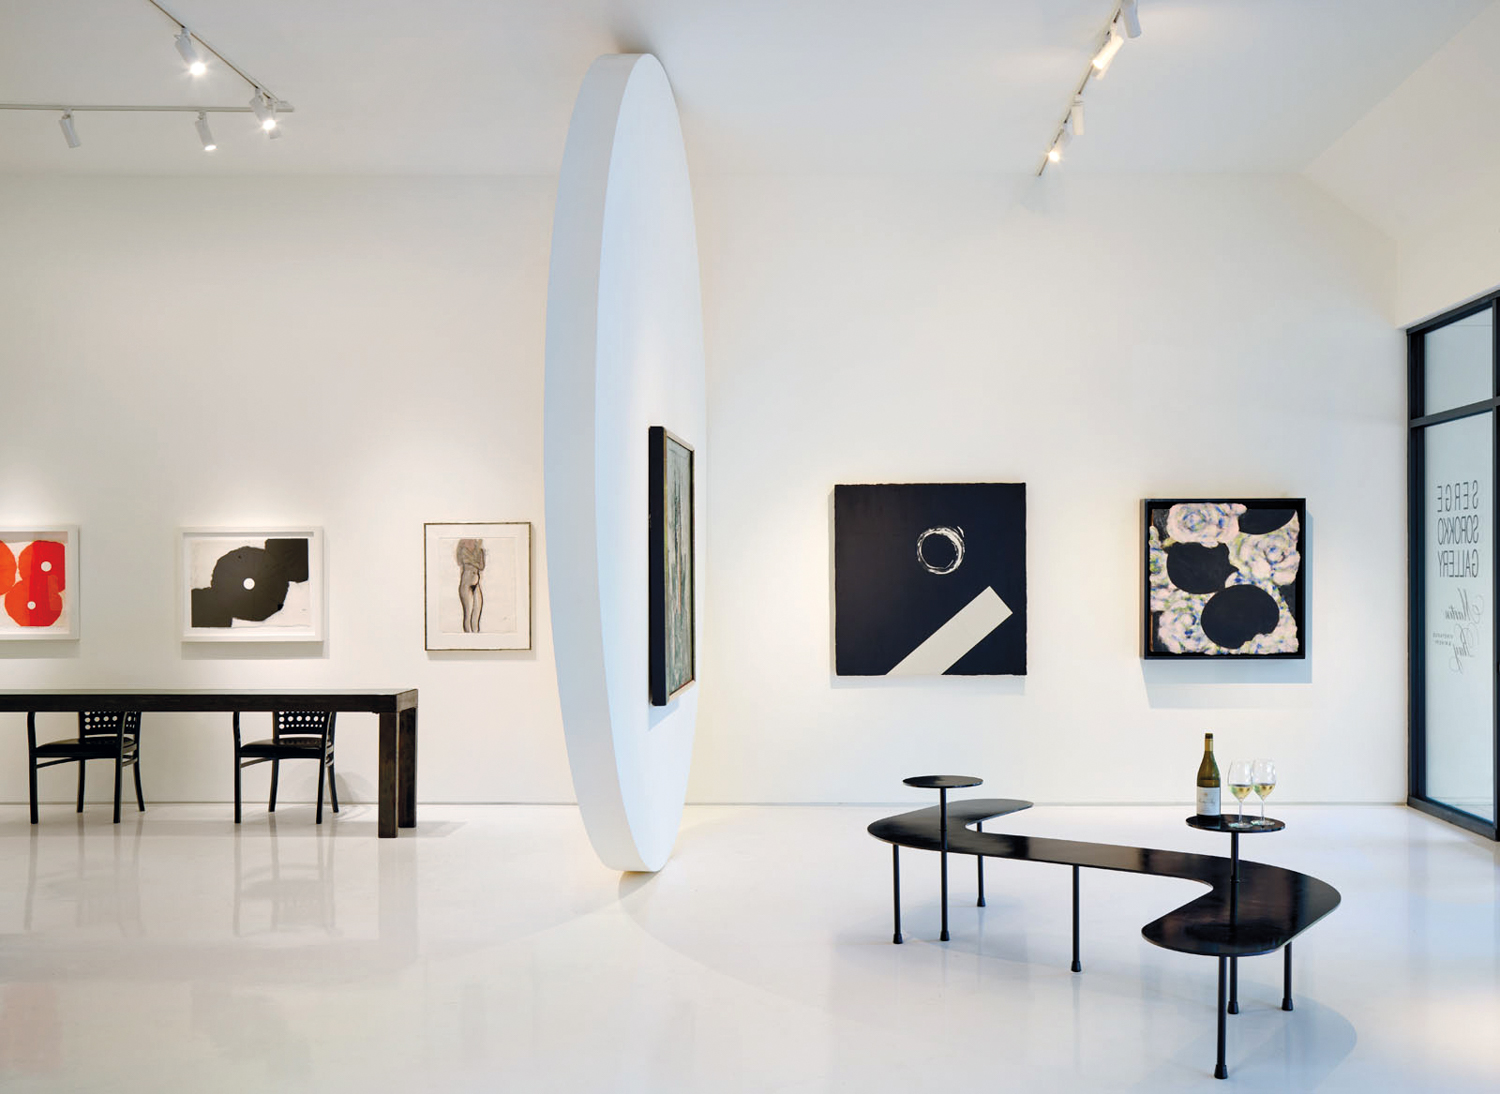 White-walled gallery with black, white and red artwork on the walls and curved black metal benches.